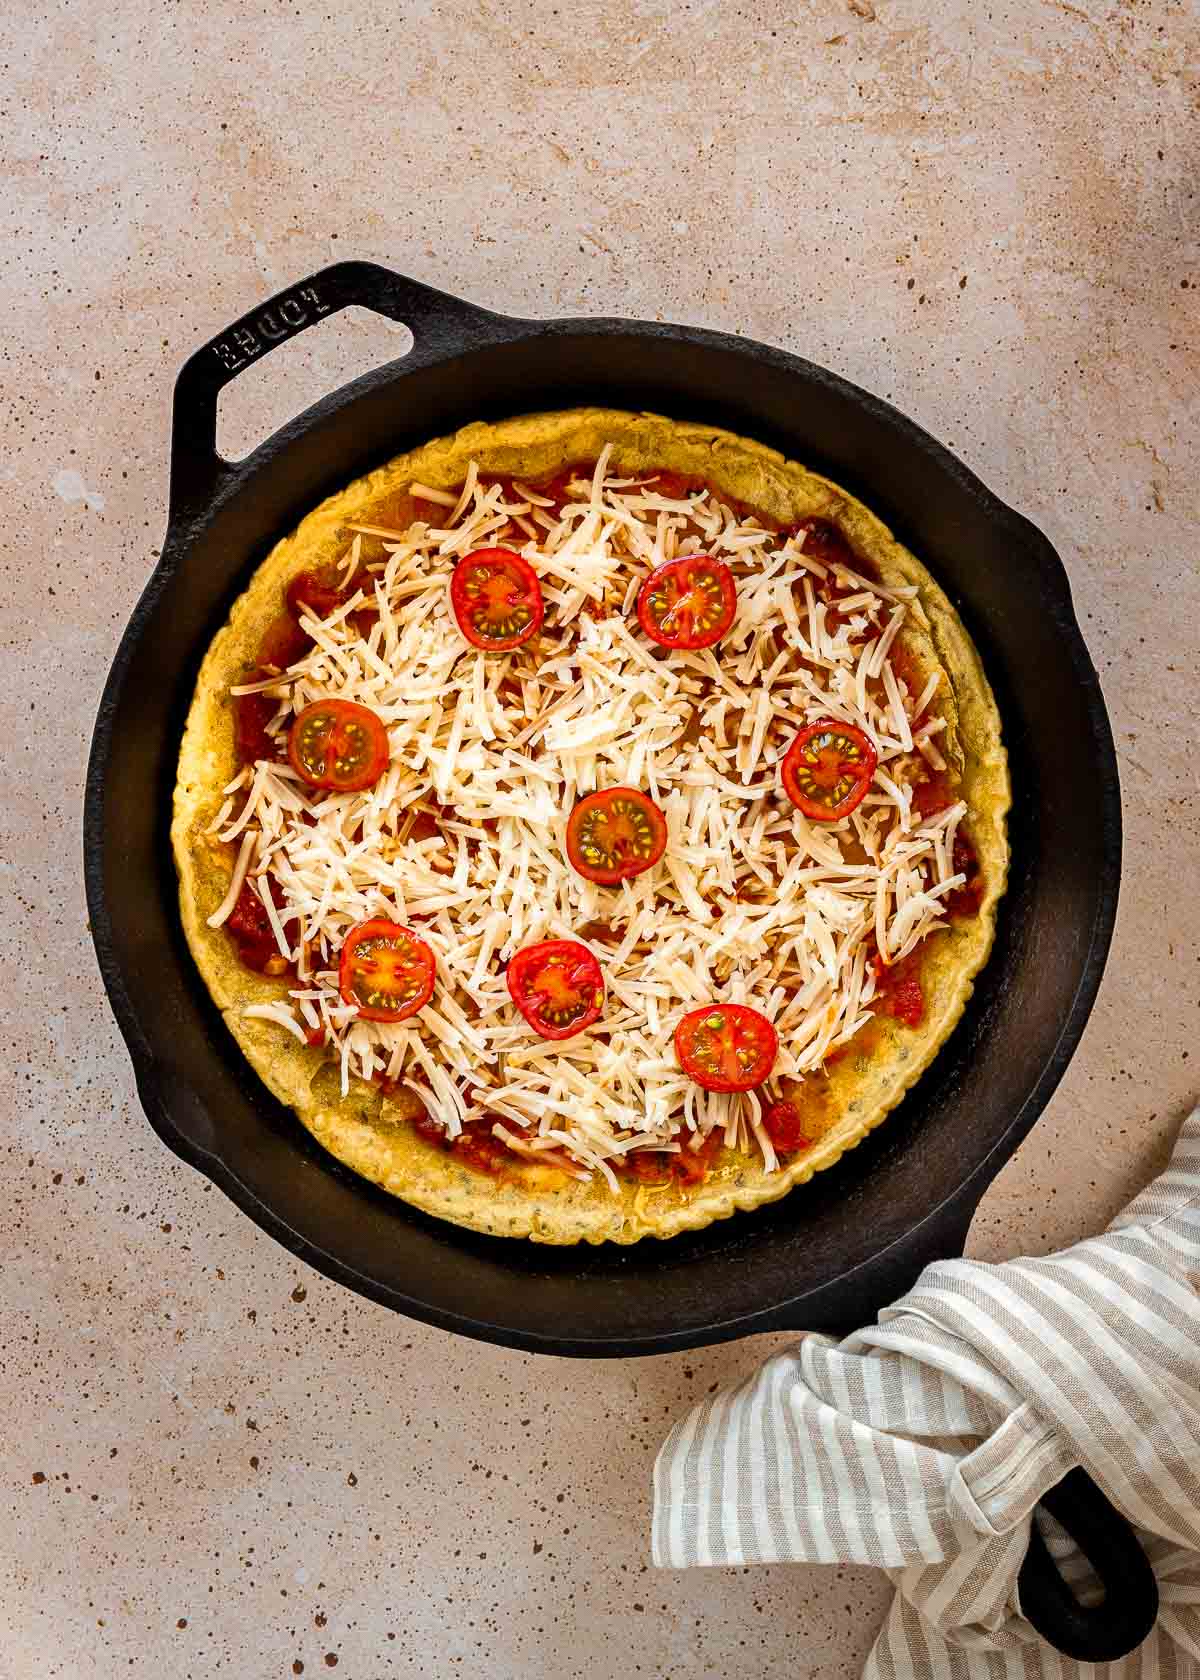 Chickpea pizza crust with uncooked toppings in cast iron pan.